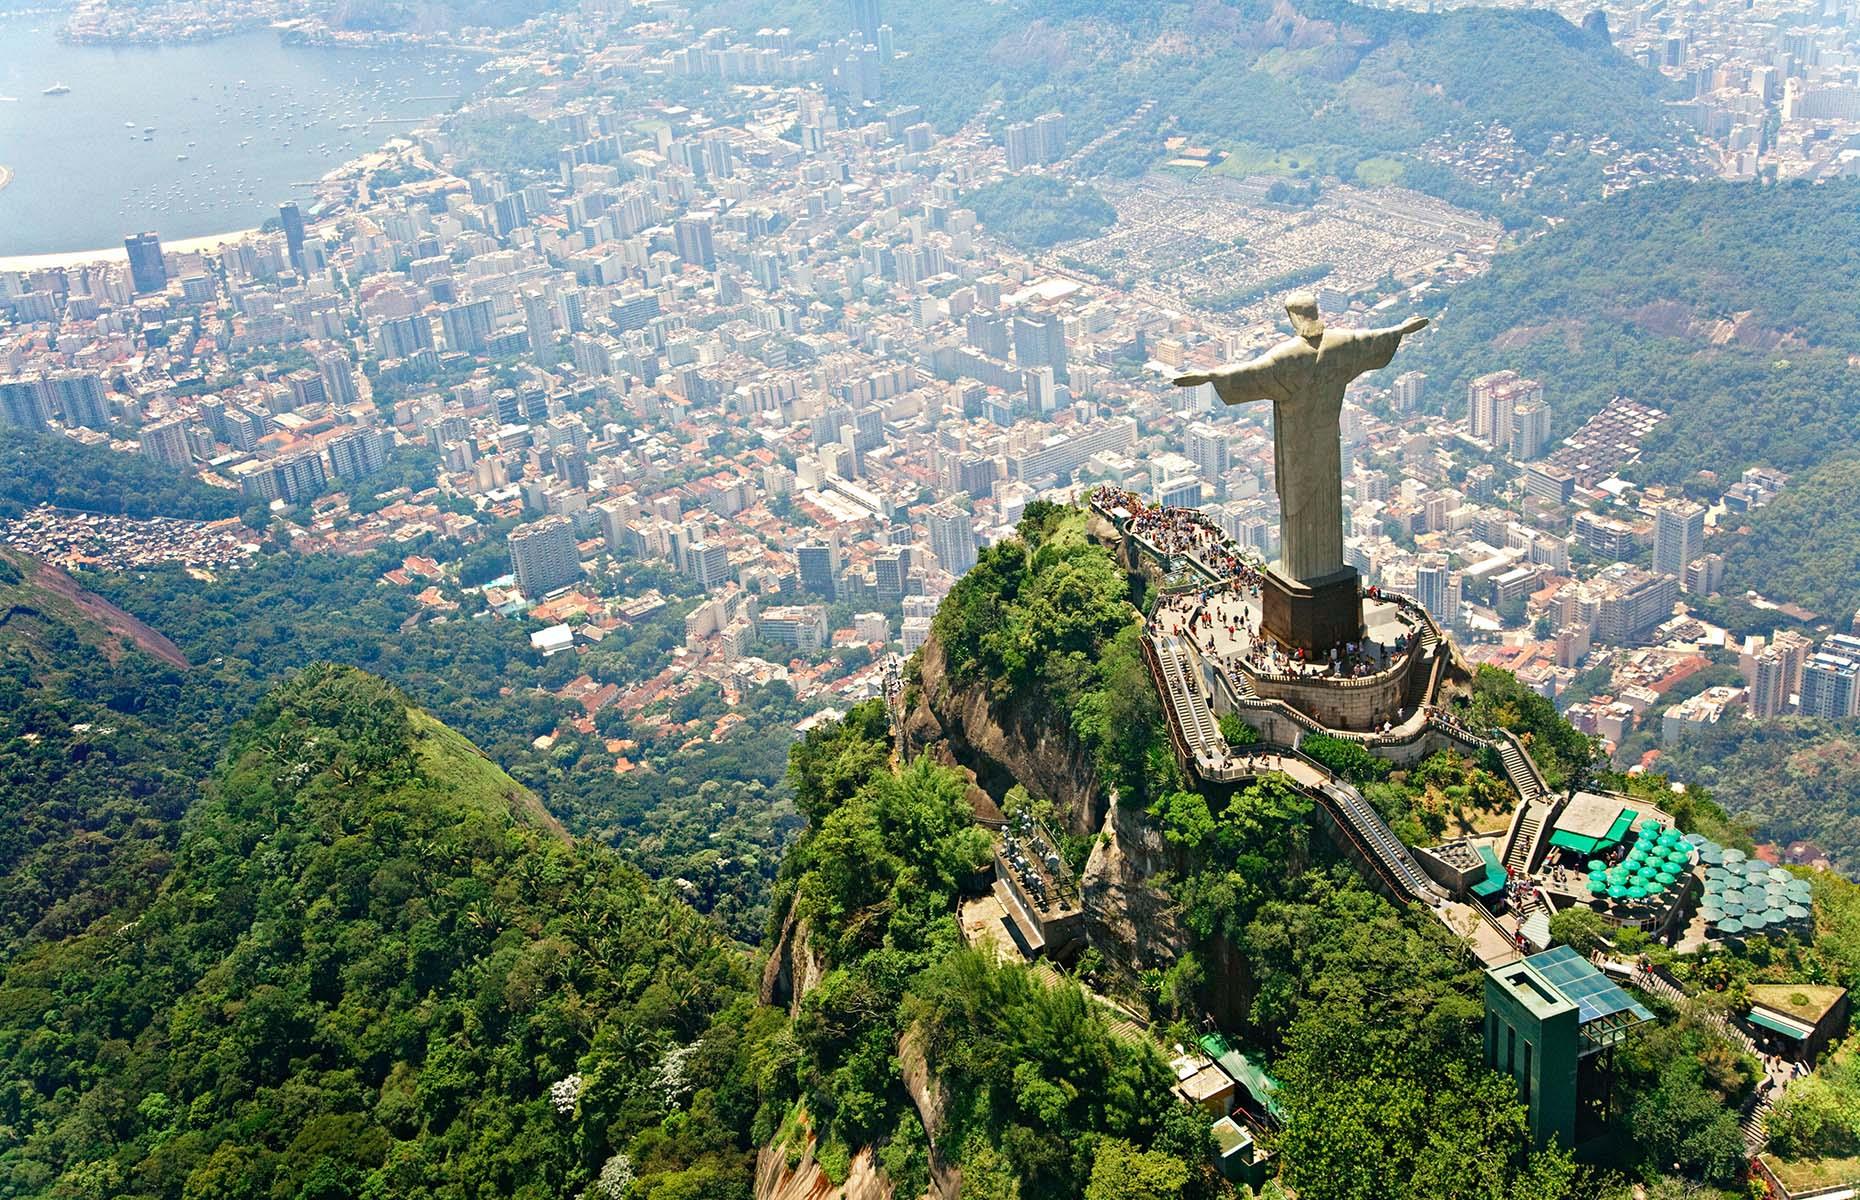 <p>Whether you're religious or not, the sight of the 98-foot (30m) sculpture of Christ rising above Rio de Janeiro's magical mountainous landscape with outstretched arms can't fail to stir you. The largest Art Deco statue in the world, this world-famous monument was the brainchild of a priest in the 1850s but it wasn't built until the 1920s. Dedicated in 1931, the concrete Christ has surveyed the city from the top of the forest-clad Corcovado mountain ever since.</p>  <p><a href="https://www.loveexploring.com/gallerylist/82867/the-worlds-most-jaw-dropping-sculptures-and-statues"><strong>Discover more of the world's most jaw-dropping sculptures and statues</strong></a></p>